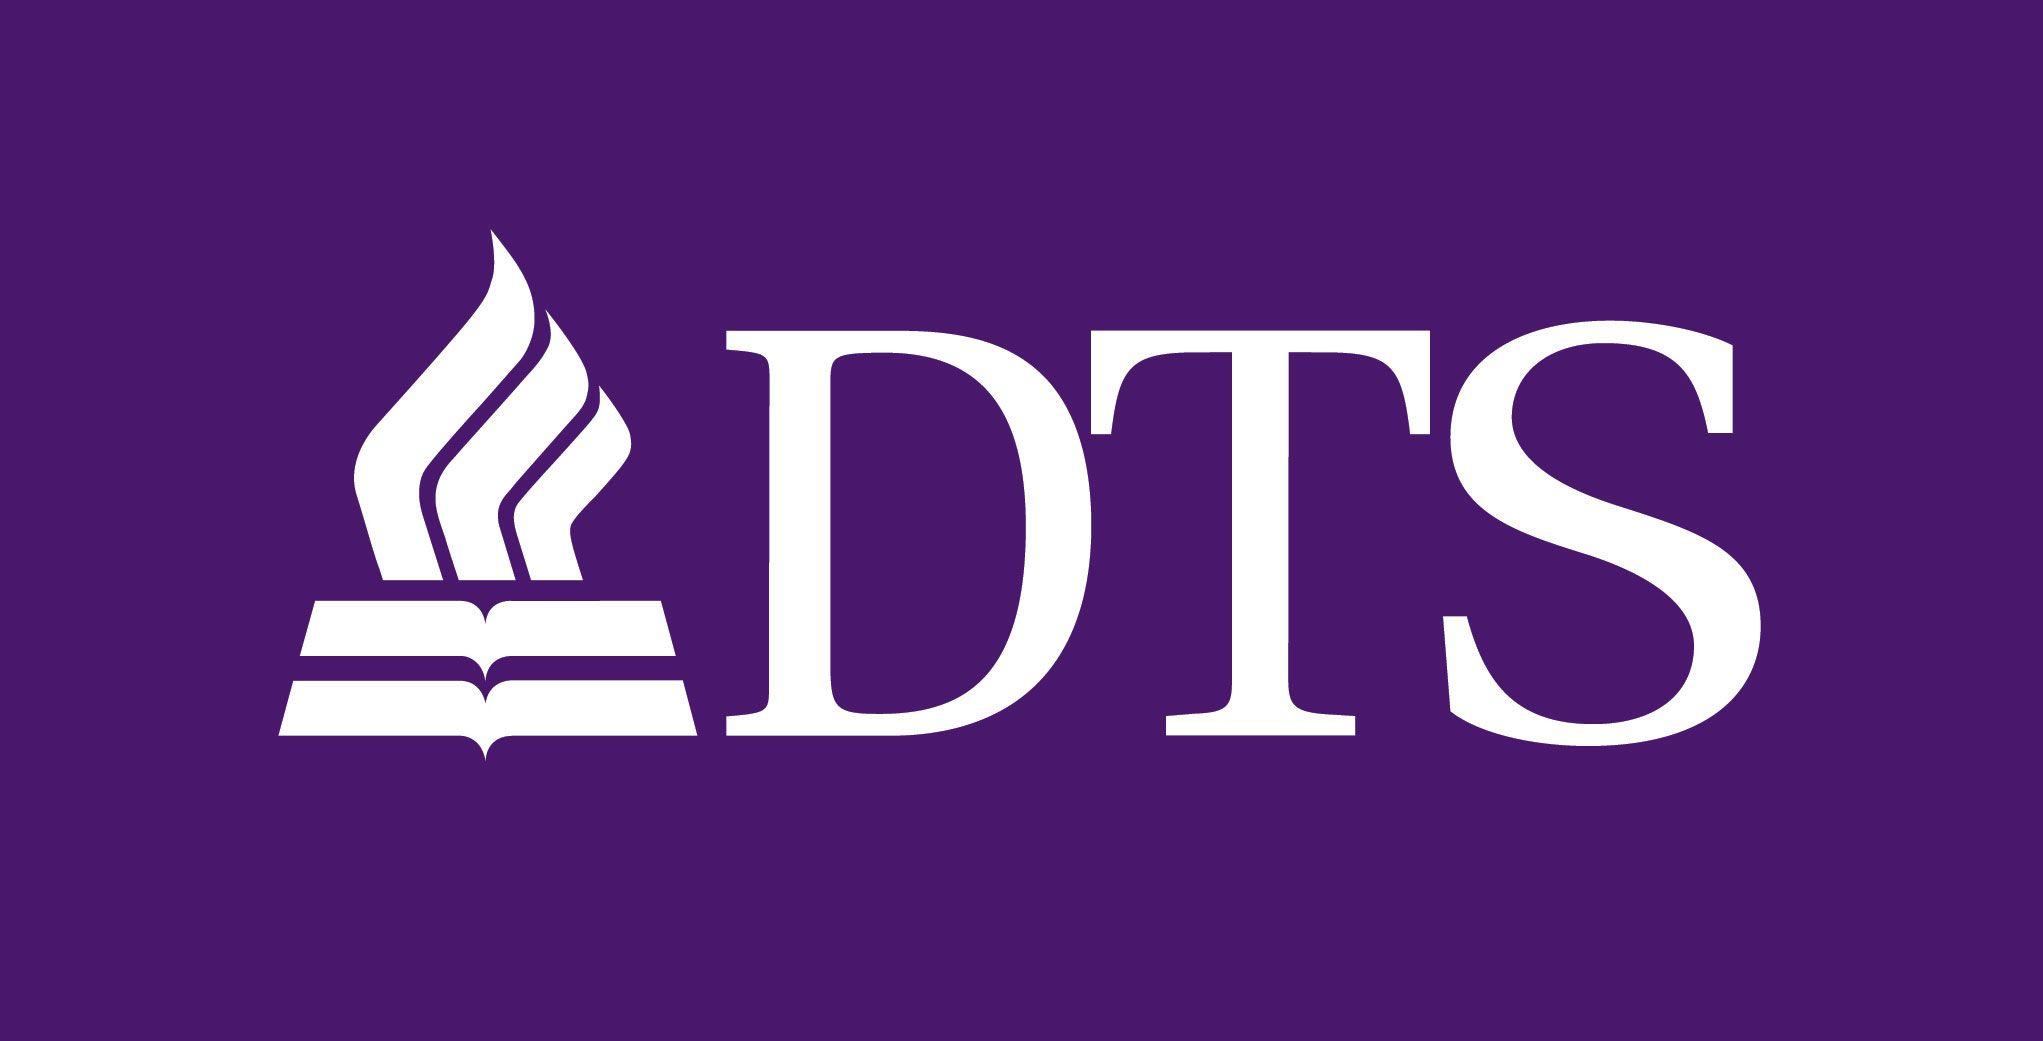 DTS Logo - DTS Logo & Color Guidelines - Dallas Theological Seminary